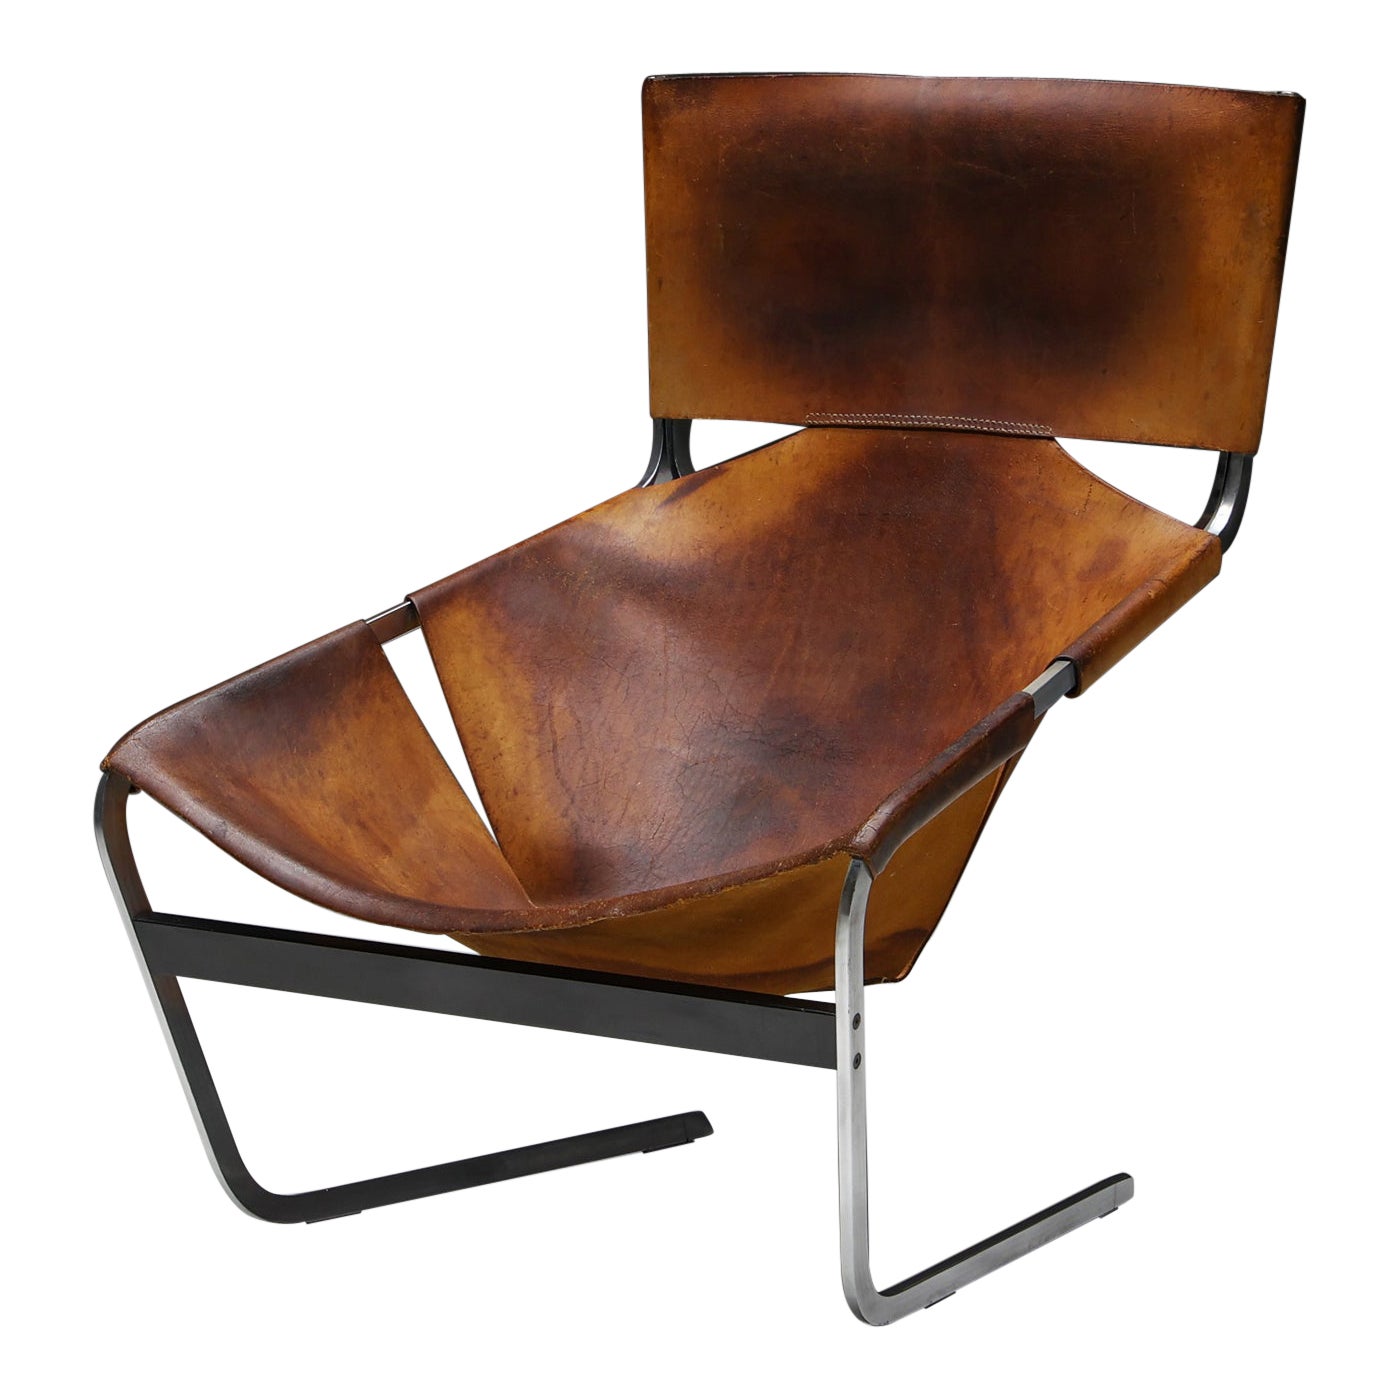 Pierre Paulin F444 Leather Lounge Chair Artifort, Holland, 1970s